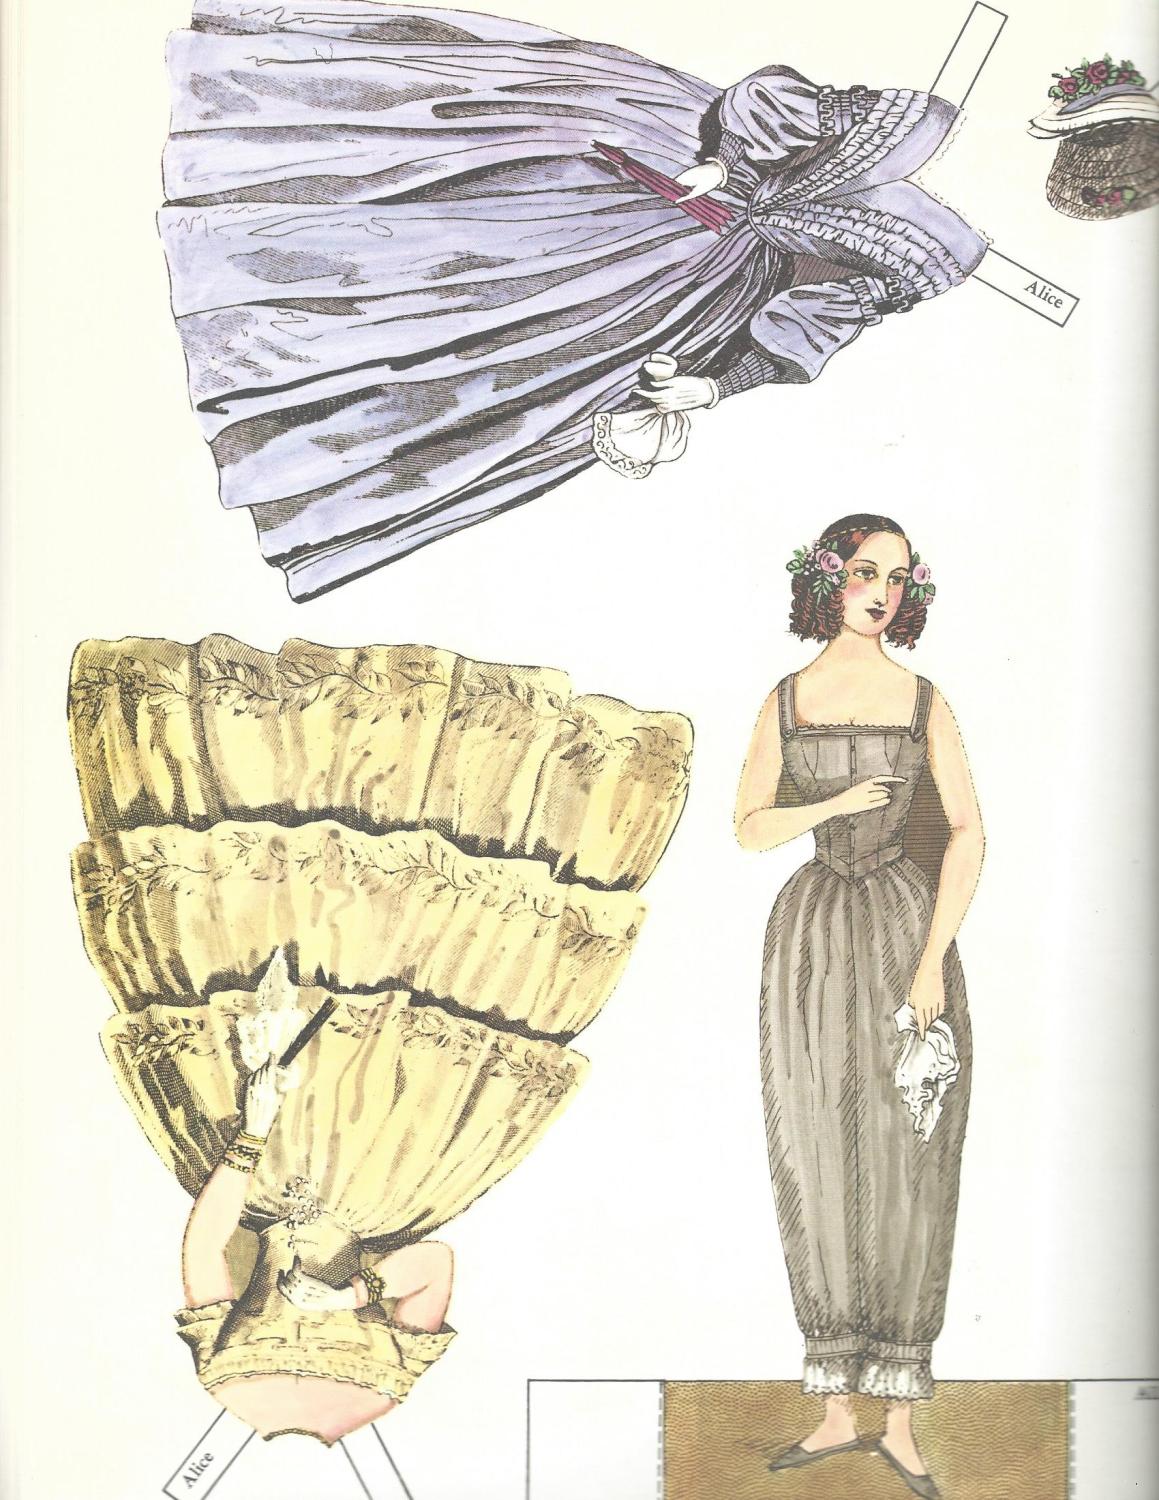 Dover Victorian Paper Dolls Ser.: Fashion Paper Dolls from Godey's Lady's Book for sale online 1977, Trade Paperback 1840-1854 by Susan Johnston 